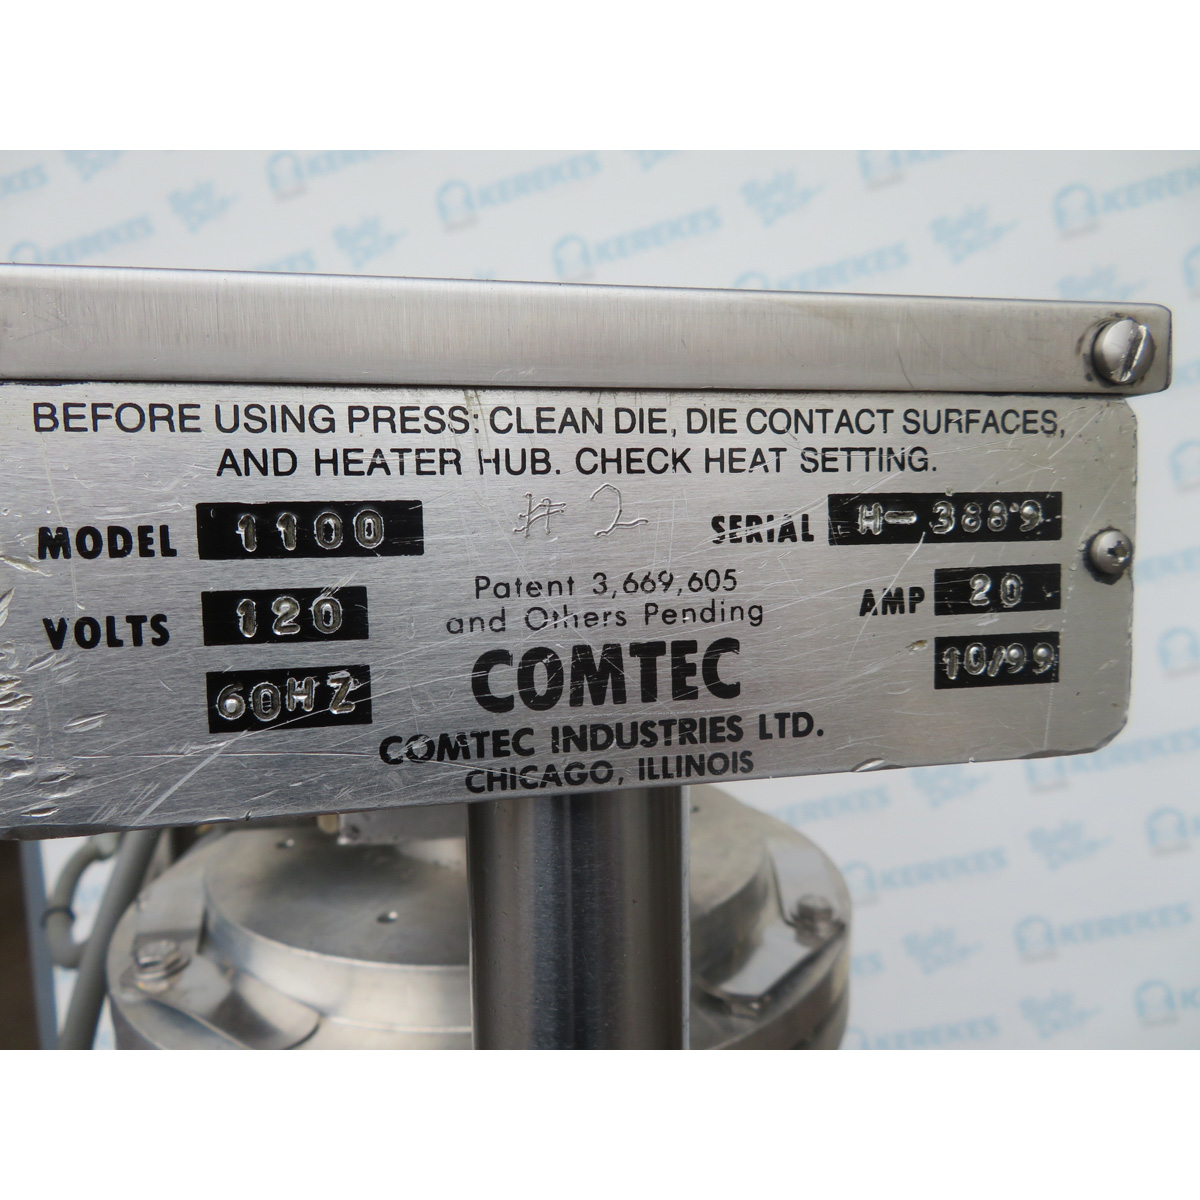 Comtec Pie Crust Forming Press 1100, Used Great Condition image 1